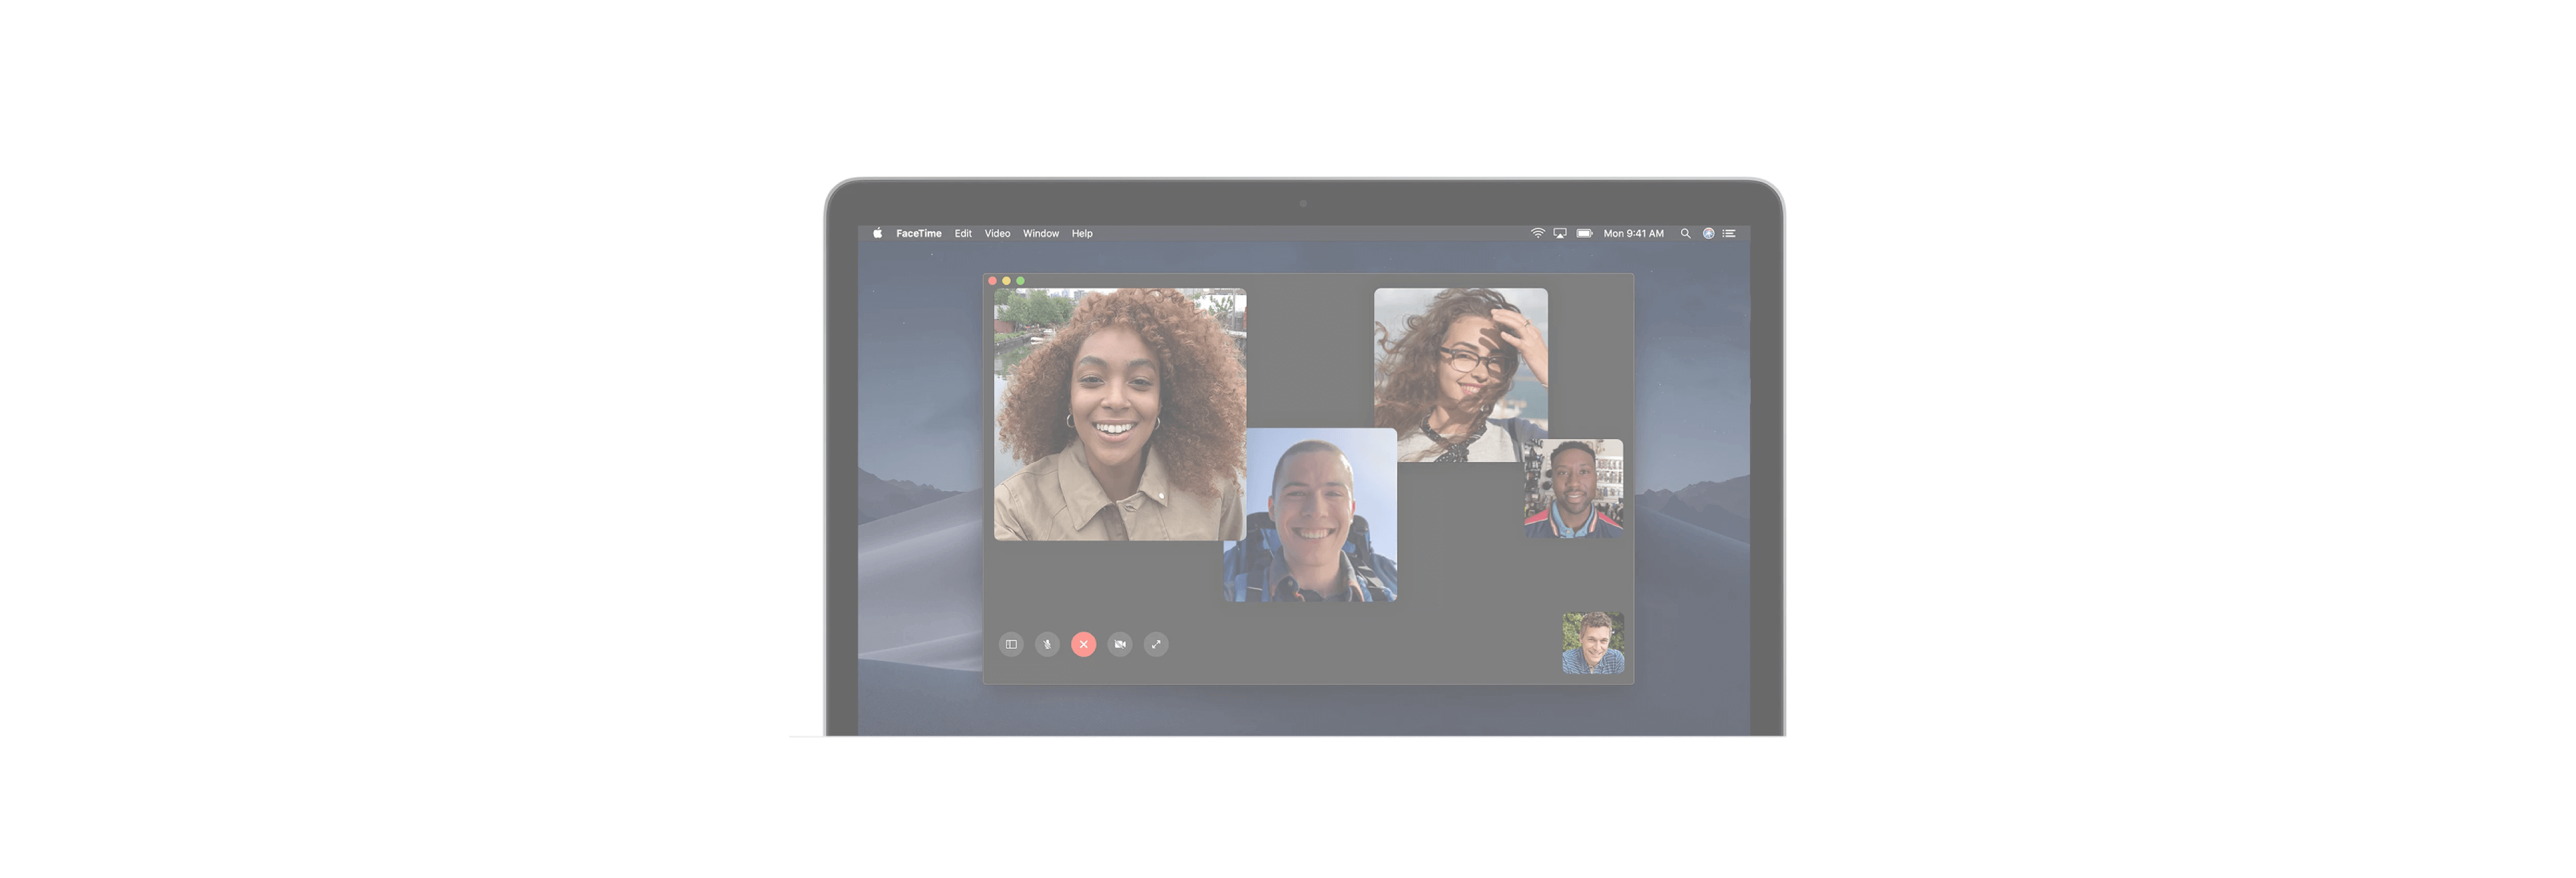 JemJem - How to make group FaceTime calls on iPhone and iPad